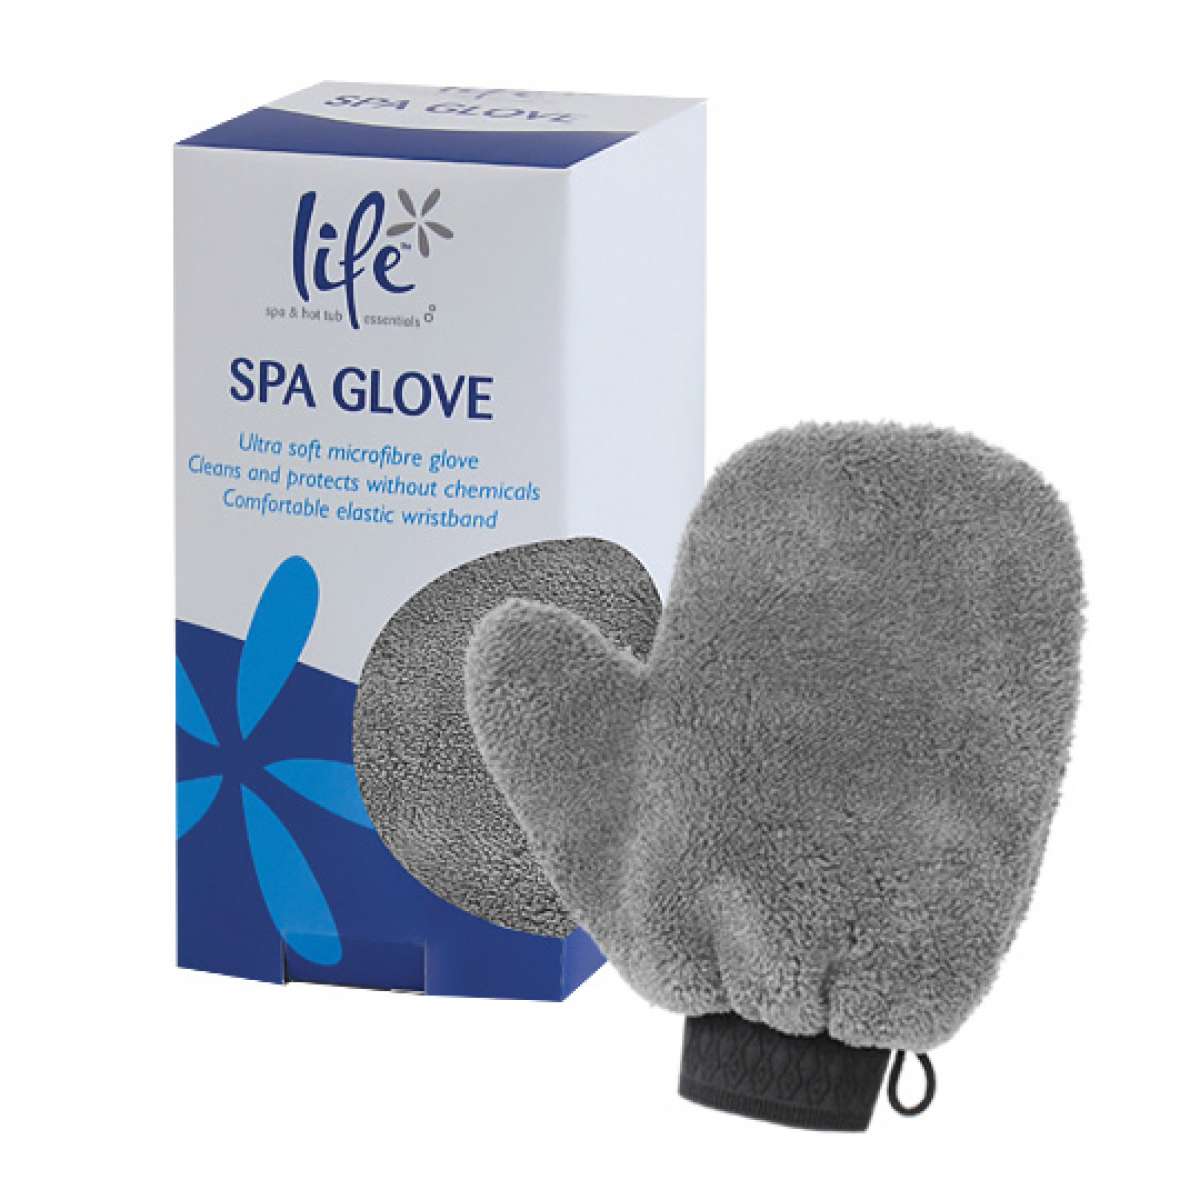 Life Spa Glove cleaning glove